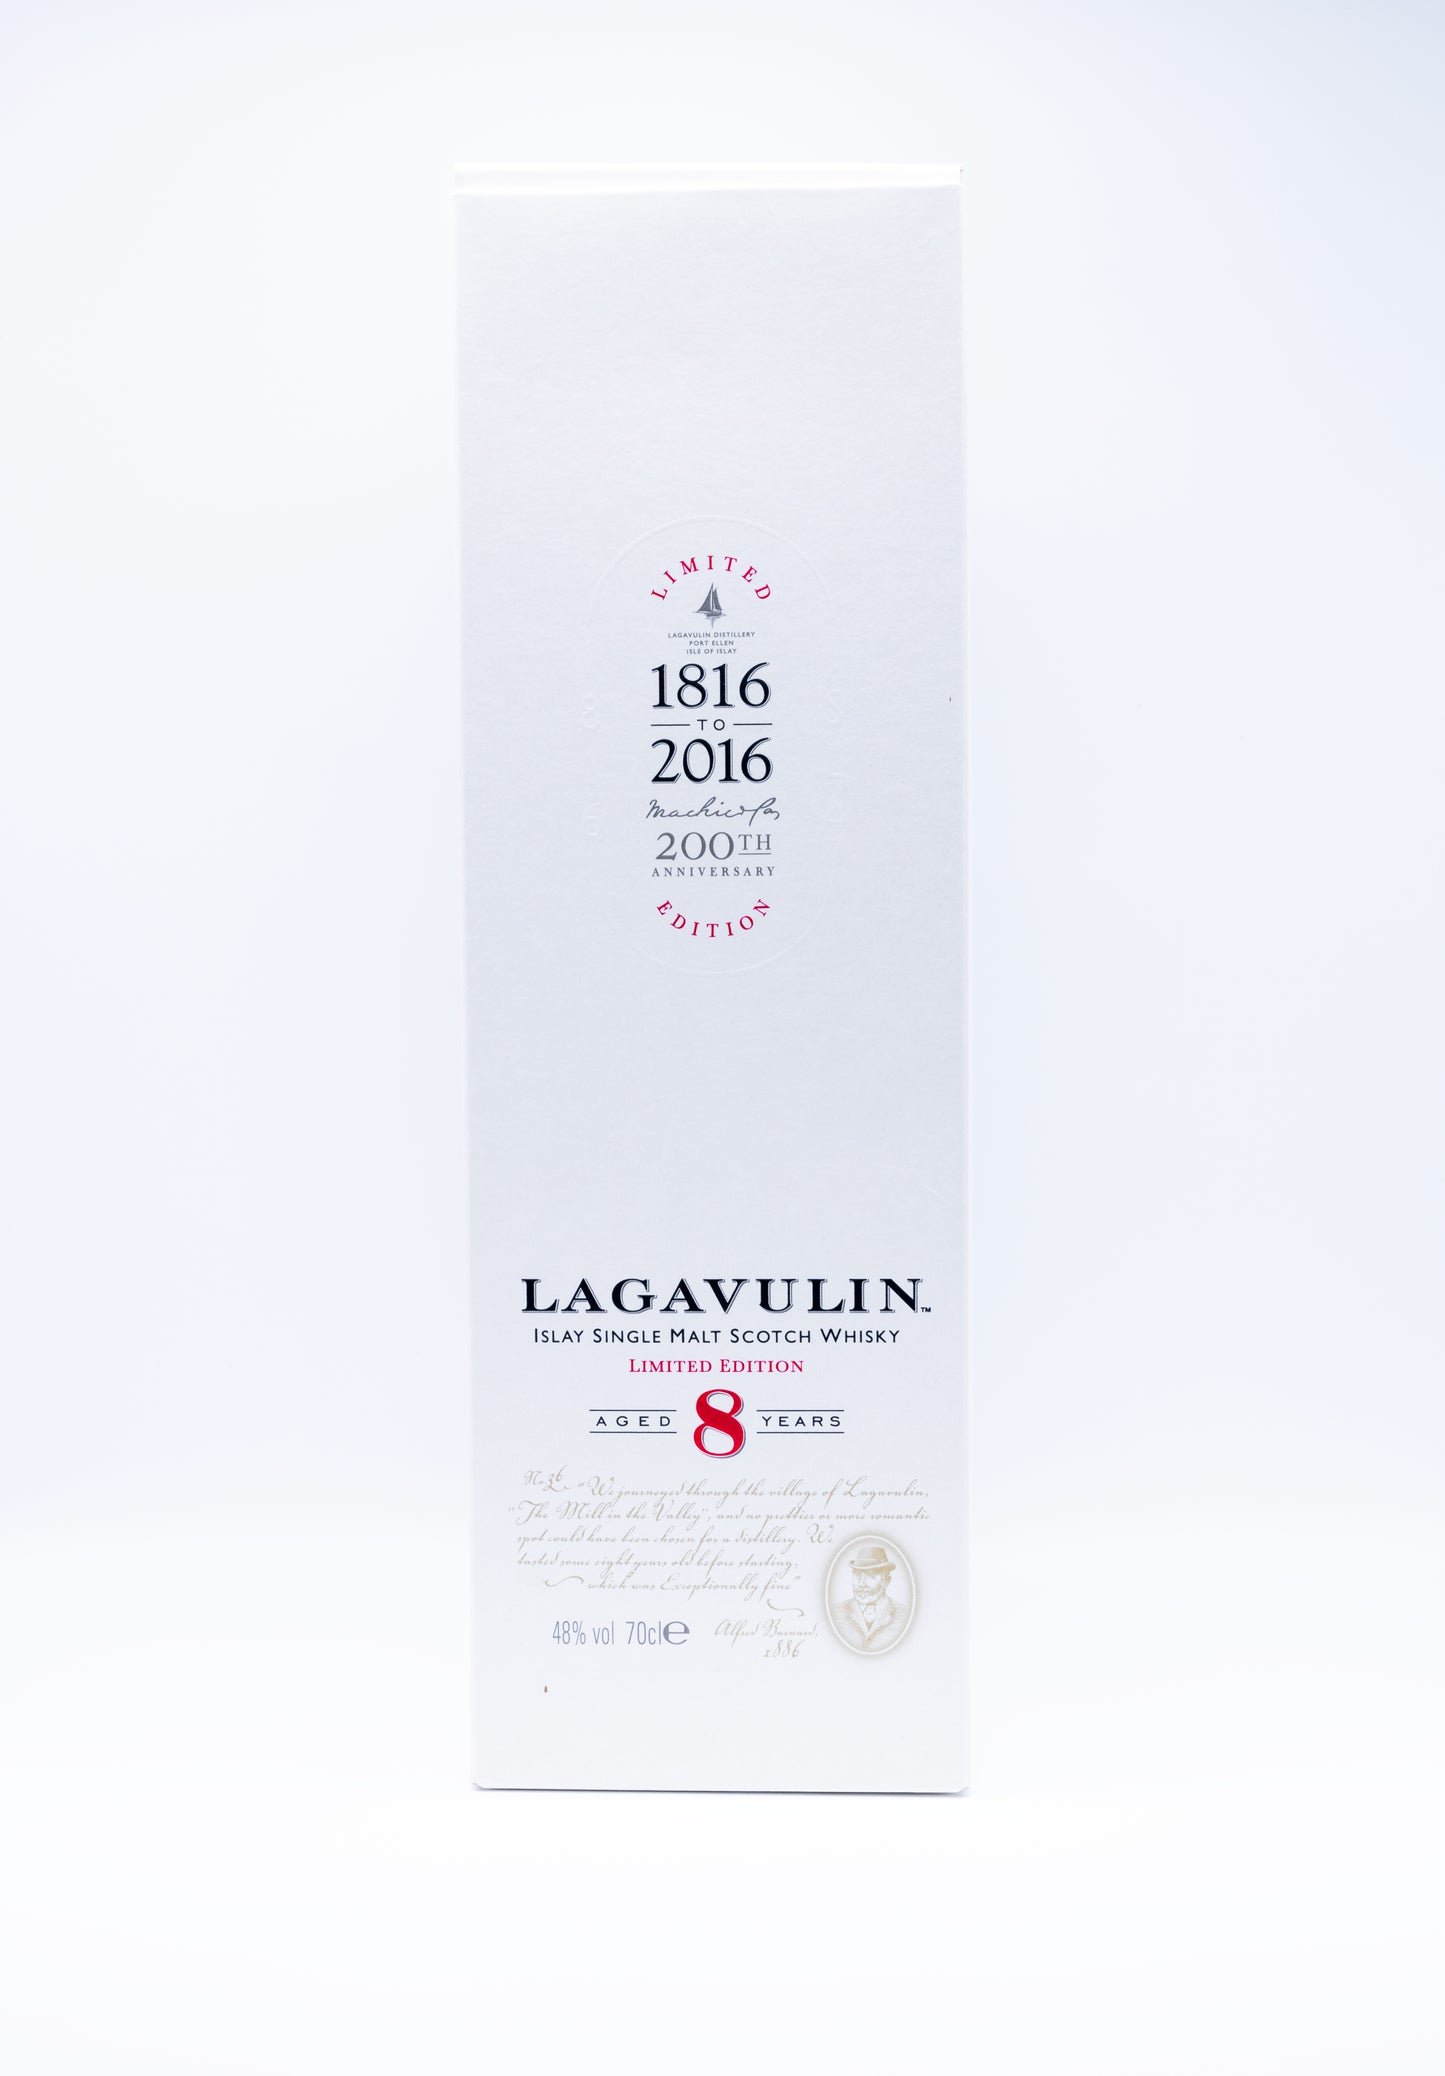 Lagavulin 200th Anniversary 8 year old Limited Edition